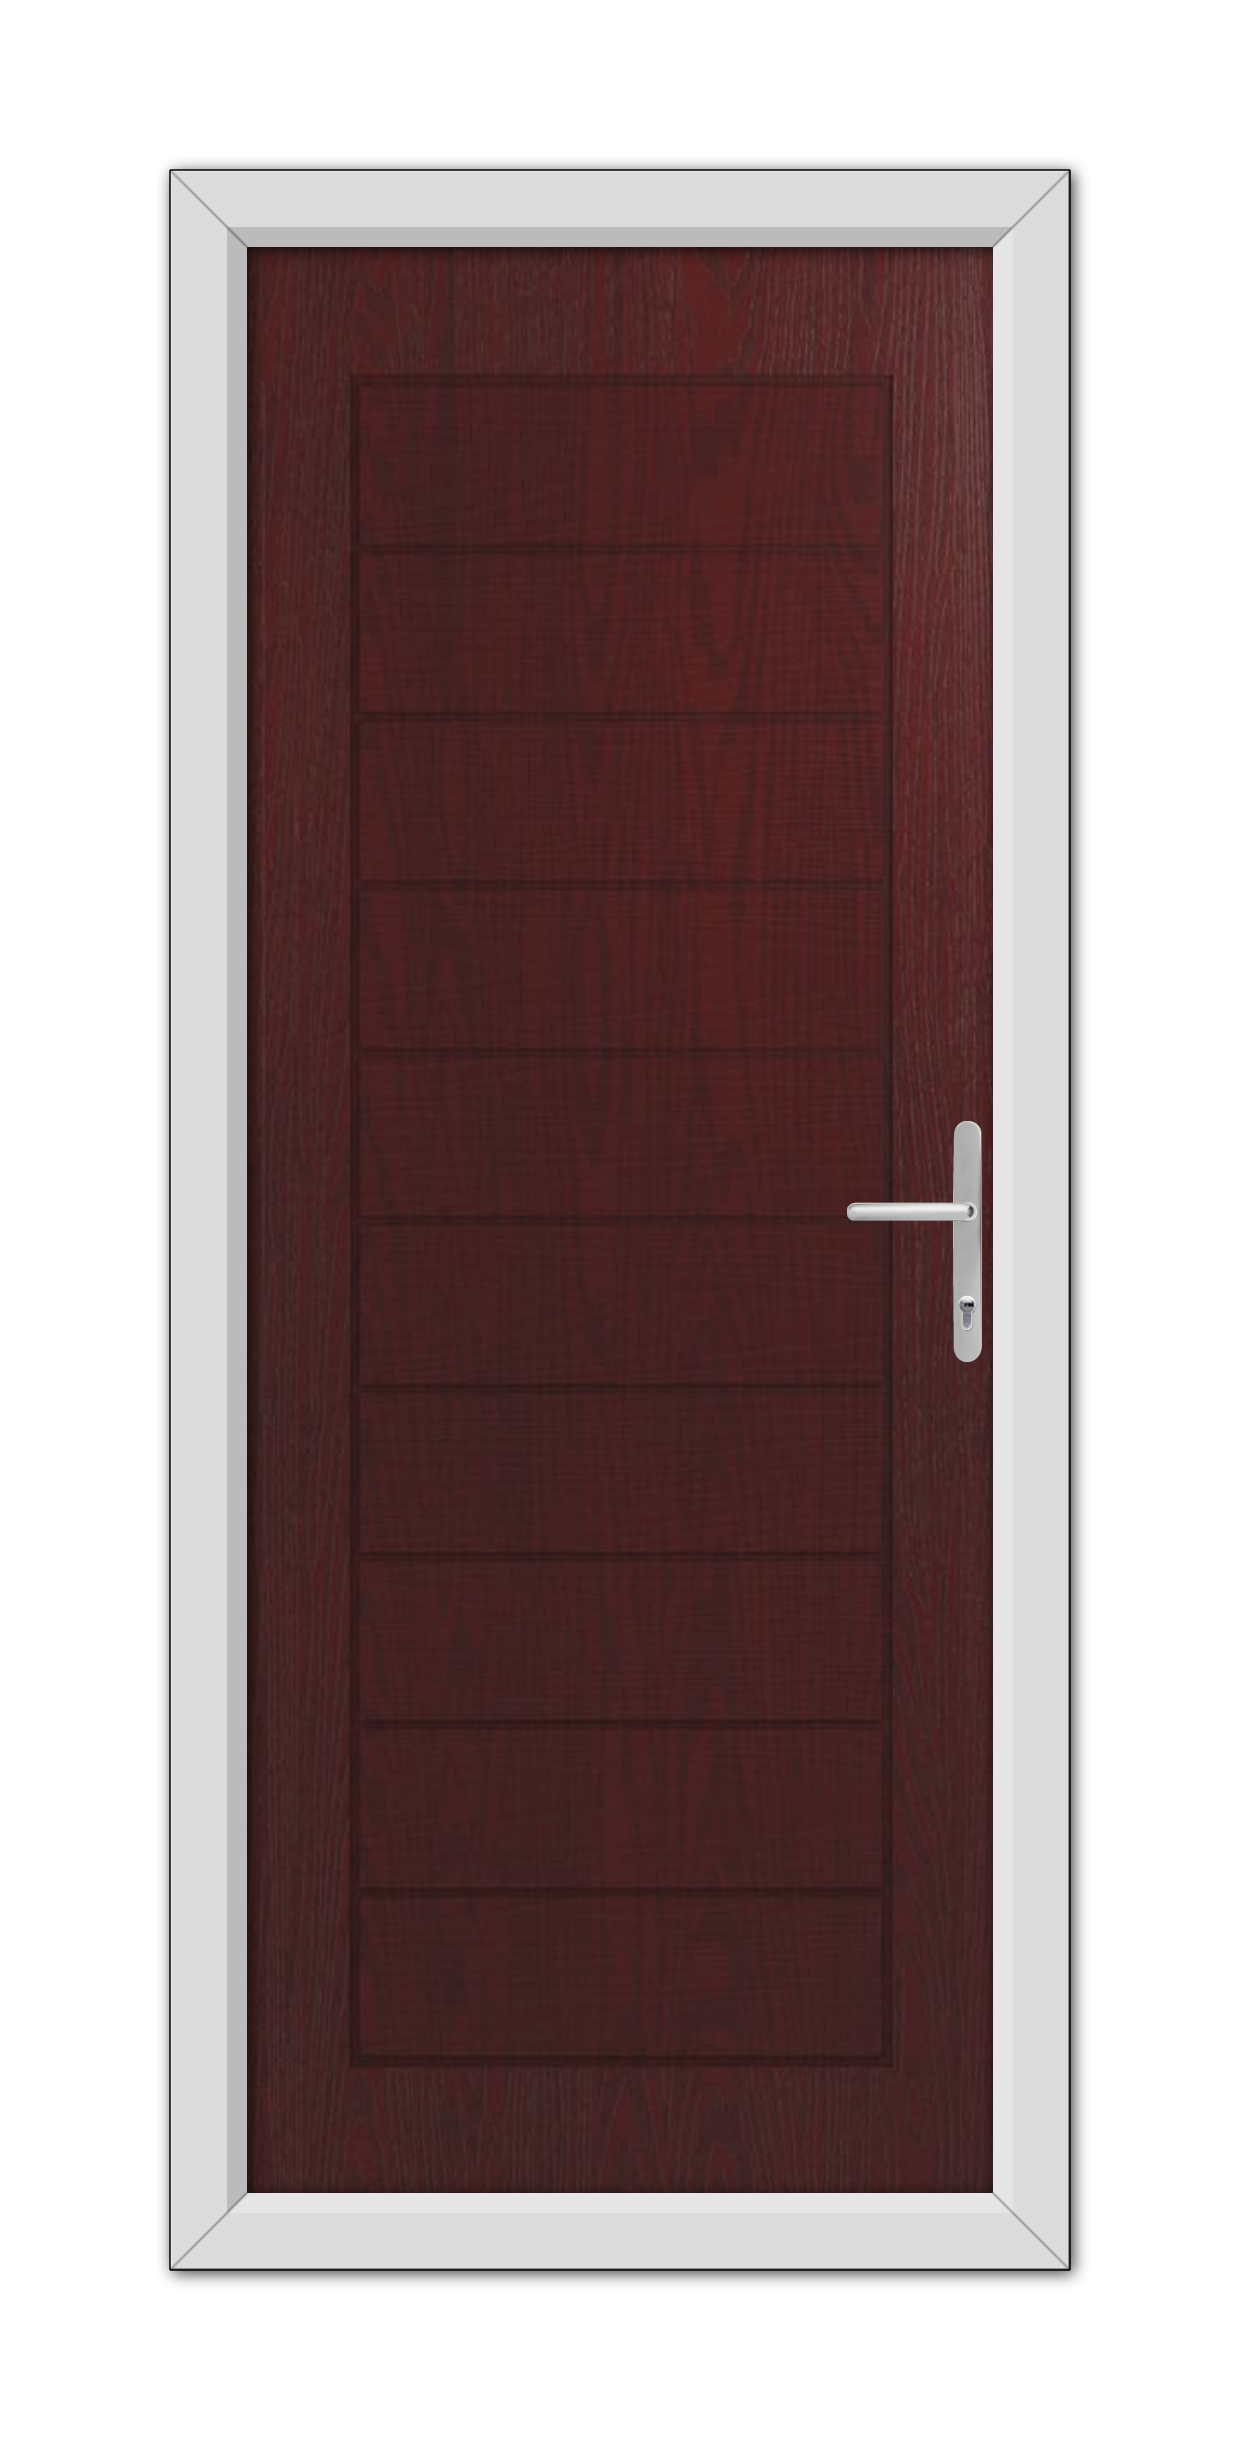 A closed Rosewood Cambridge Composite Door 48mm Timber Core with a white metal handle, framed by a white door frame, against a plain background.